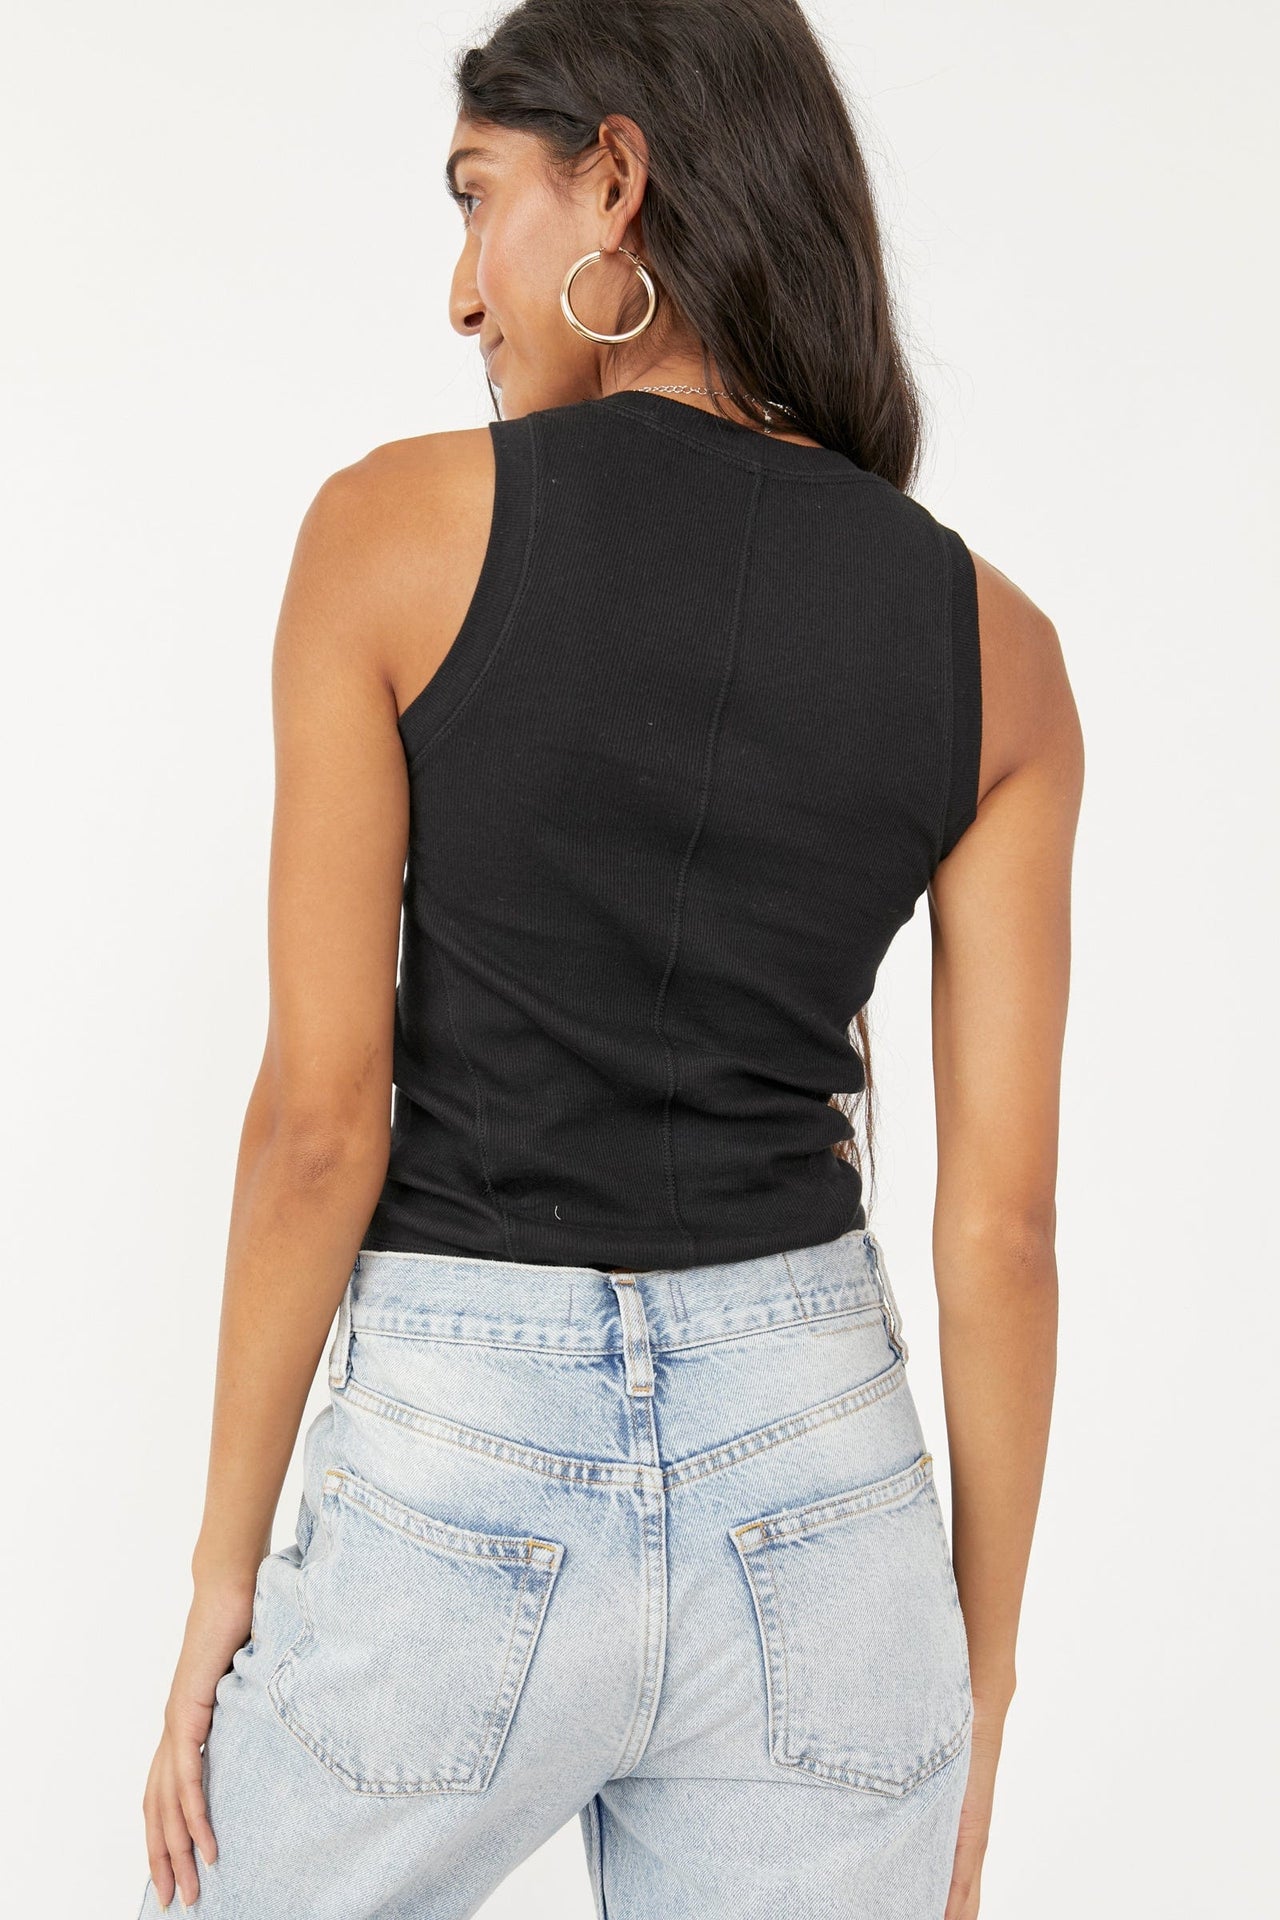 U-Neck Sleeveless Tank Top Black, Tee Casuals by Free People | LIT Boutique